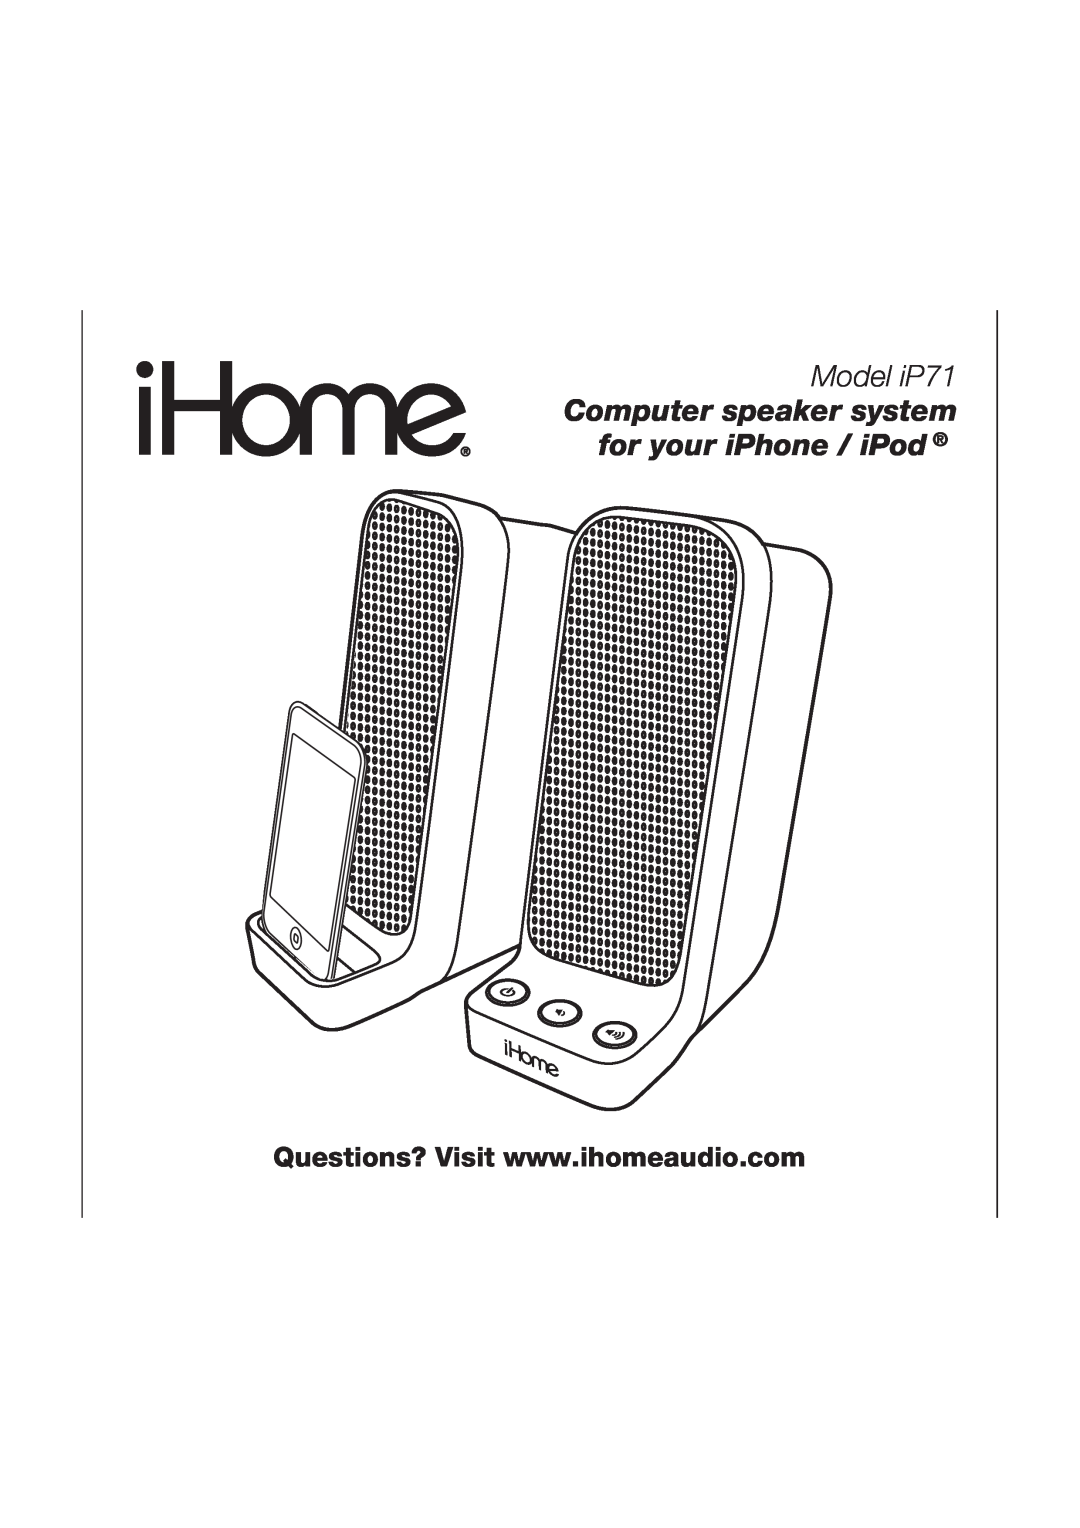 iHome manual Model iP71, Computer speaker system for your iPhone / iPod 